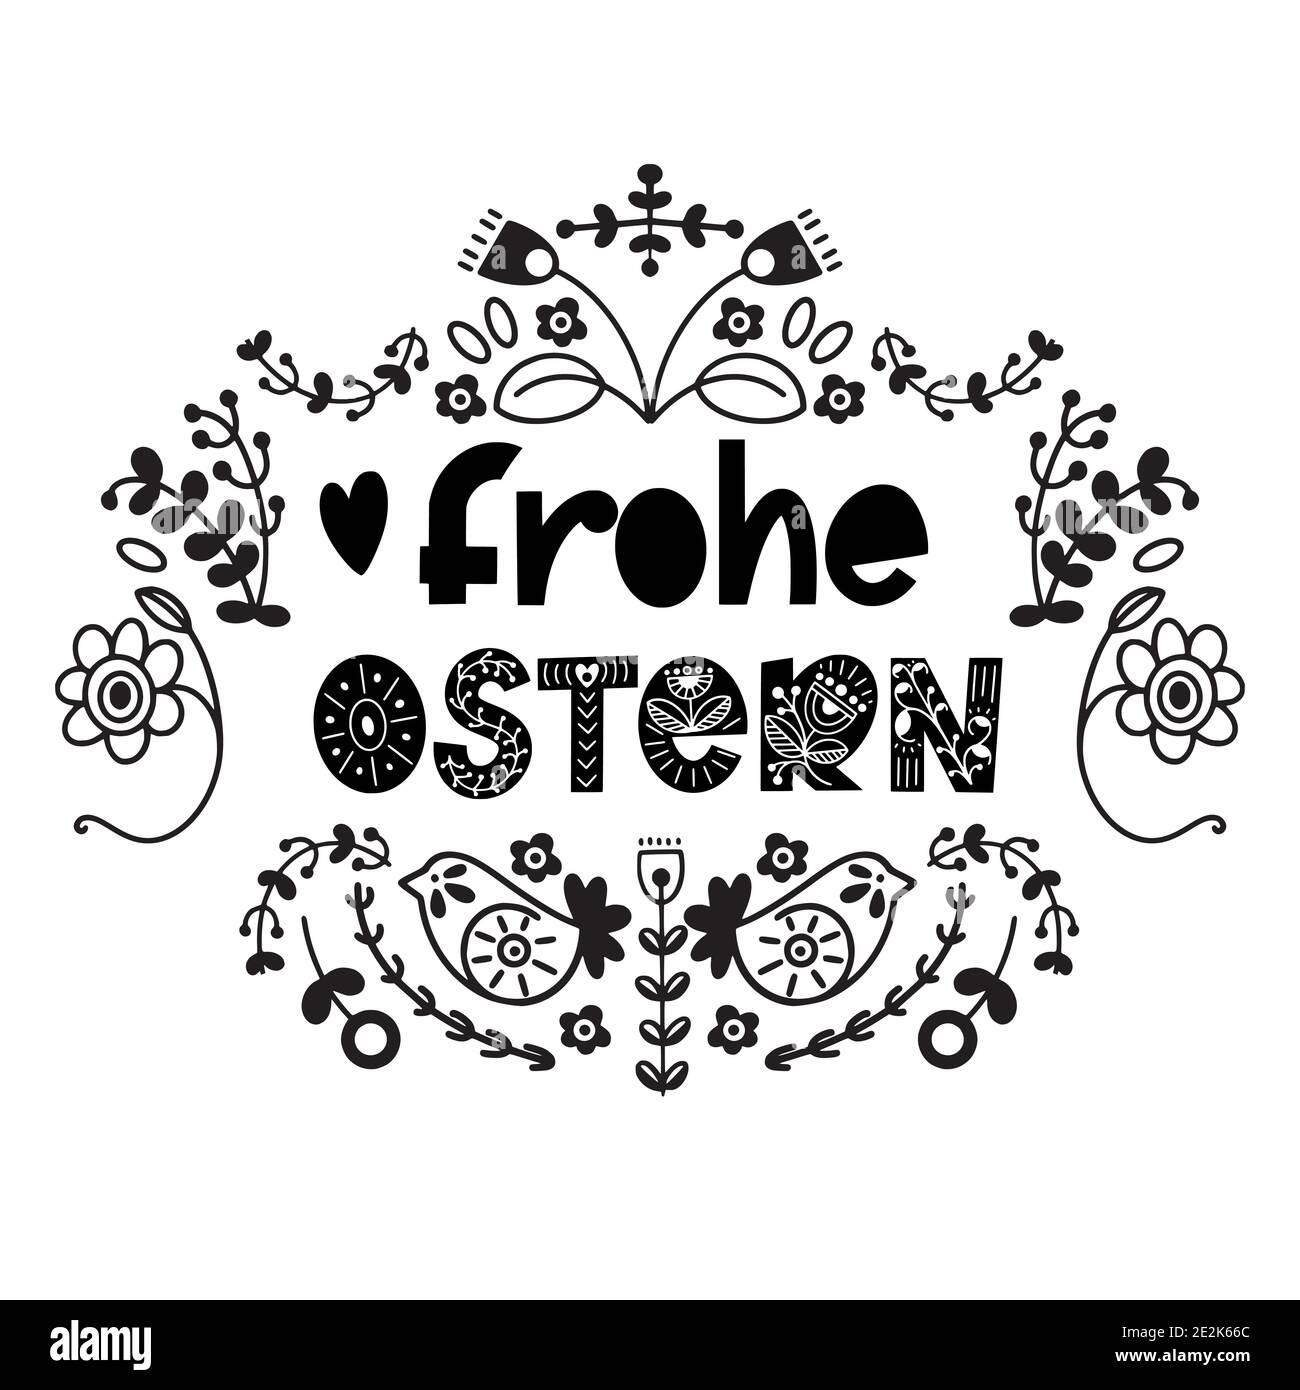 Frohe ostern Black and White Stock Photos & Images - Alamy